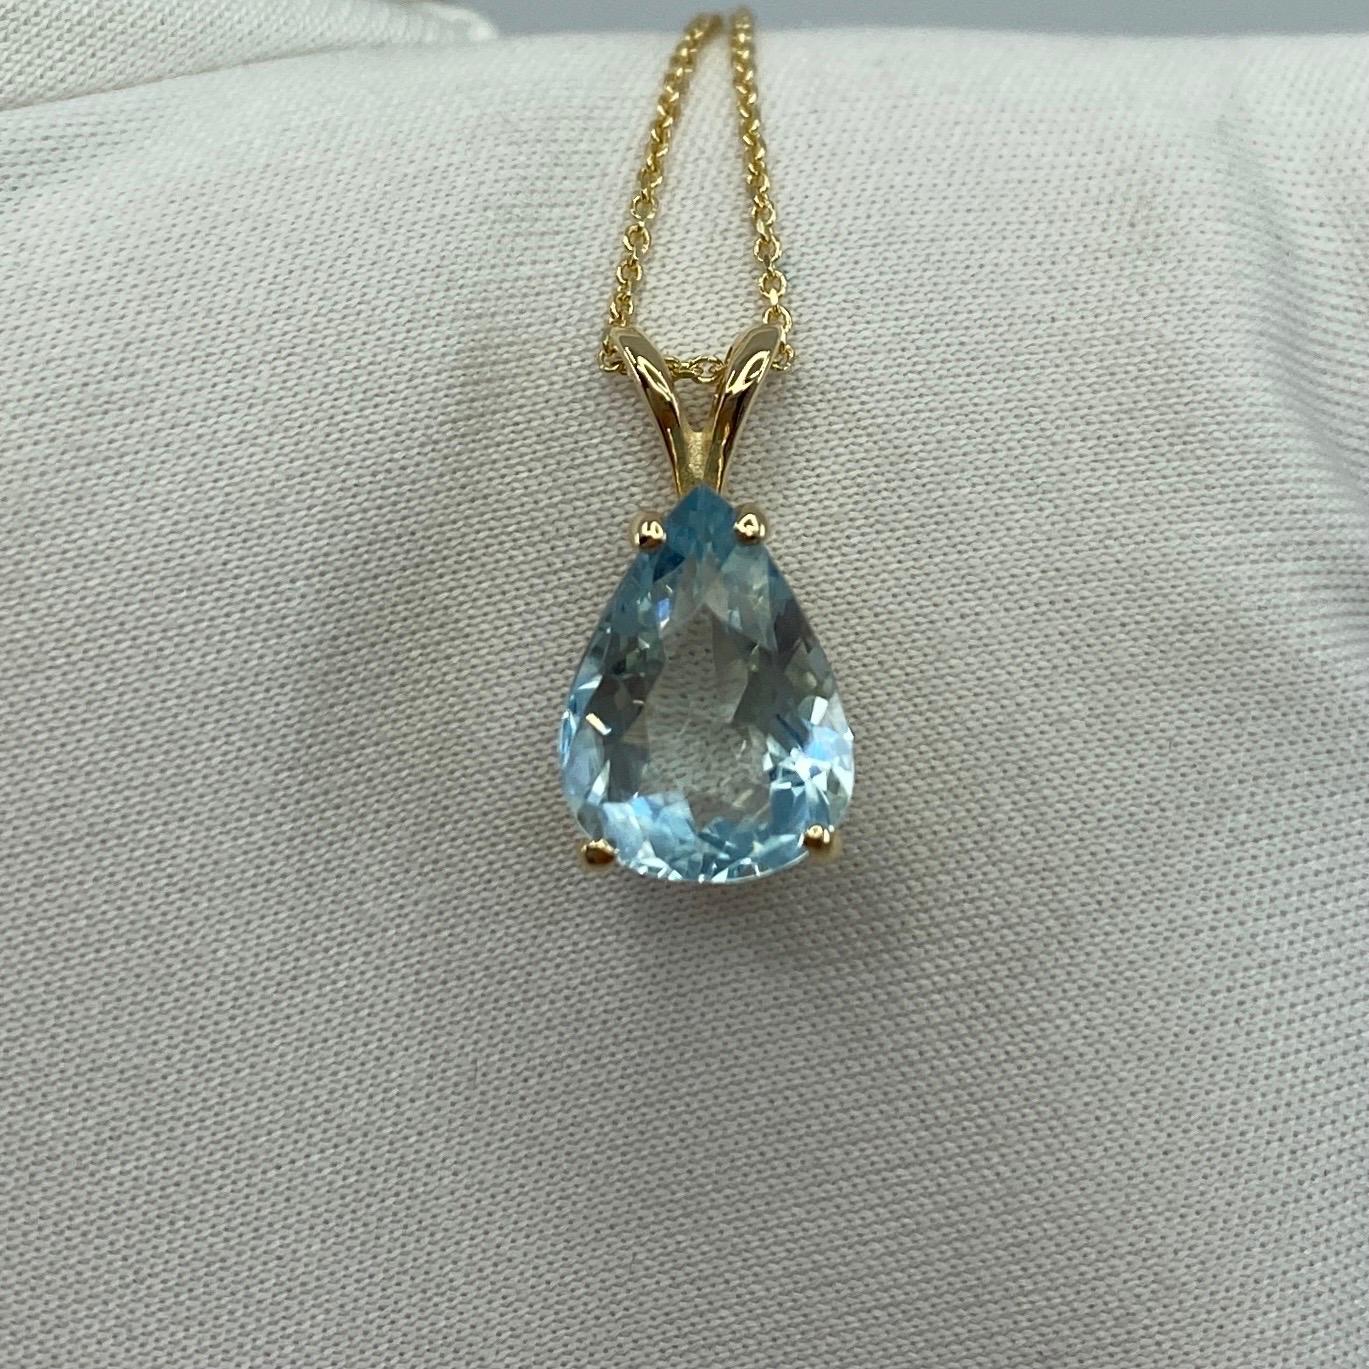 Fine Natural Blue Aquamarine Pendant Necklace.

2.20 Carat Aquamarine with a stunning blue colour set in a fine 14k yellow gold solitaire pendant.
The aquamarine has an excellent pear cut showing lots of brightness and light return. Very sparkly. It